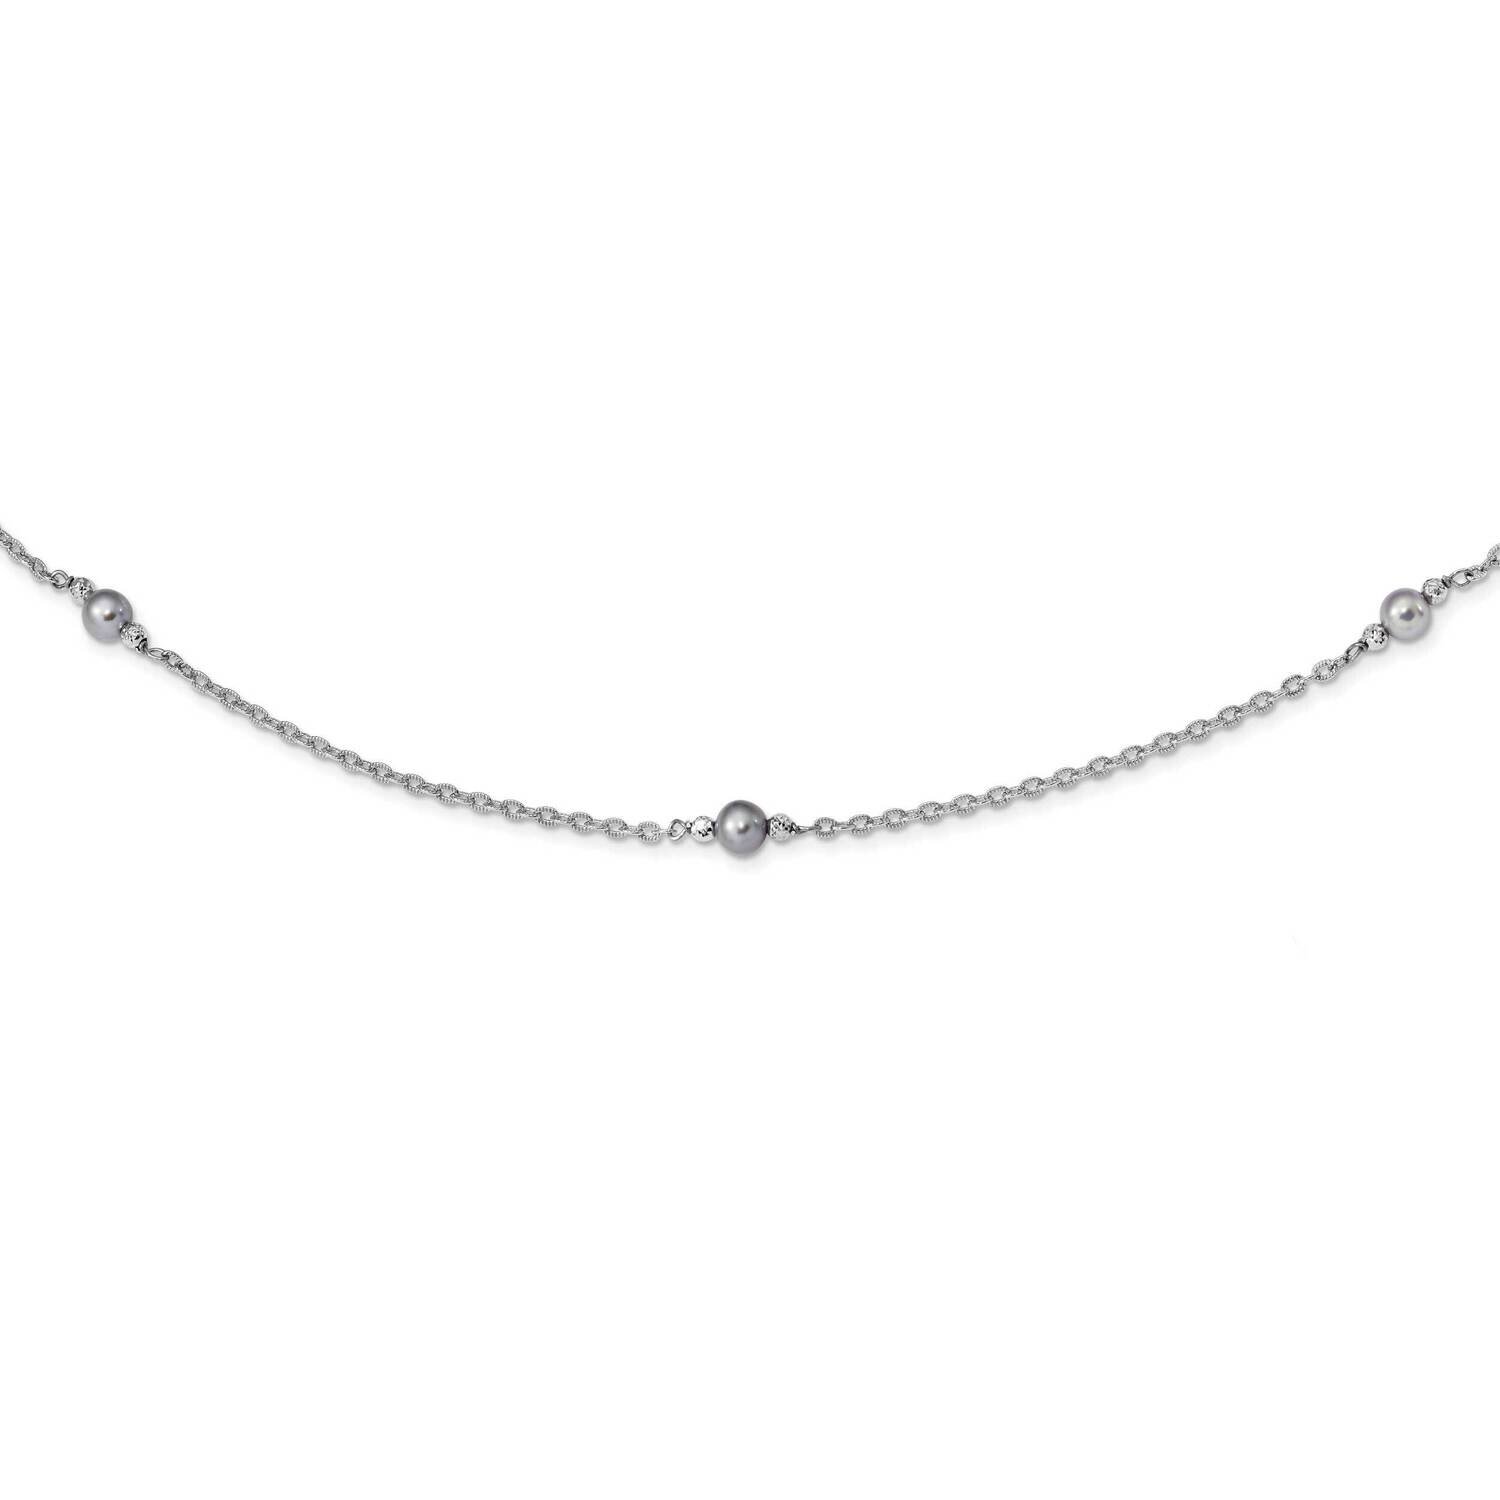 Grey Fw Cultured Texture Cable Necklace Sterling Silver Rhodium-Plated QH5257-30